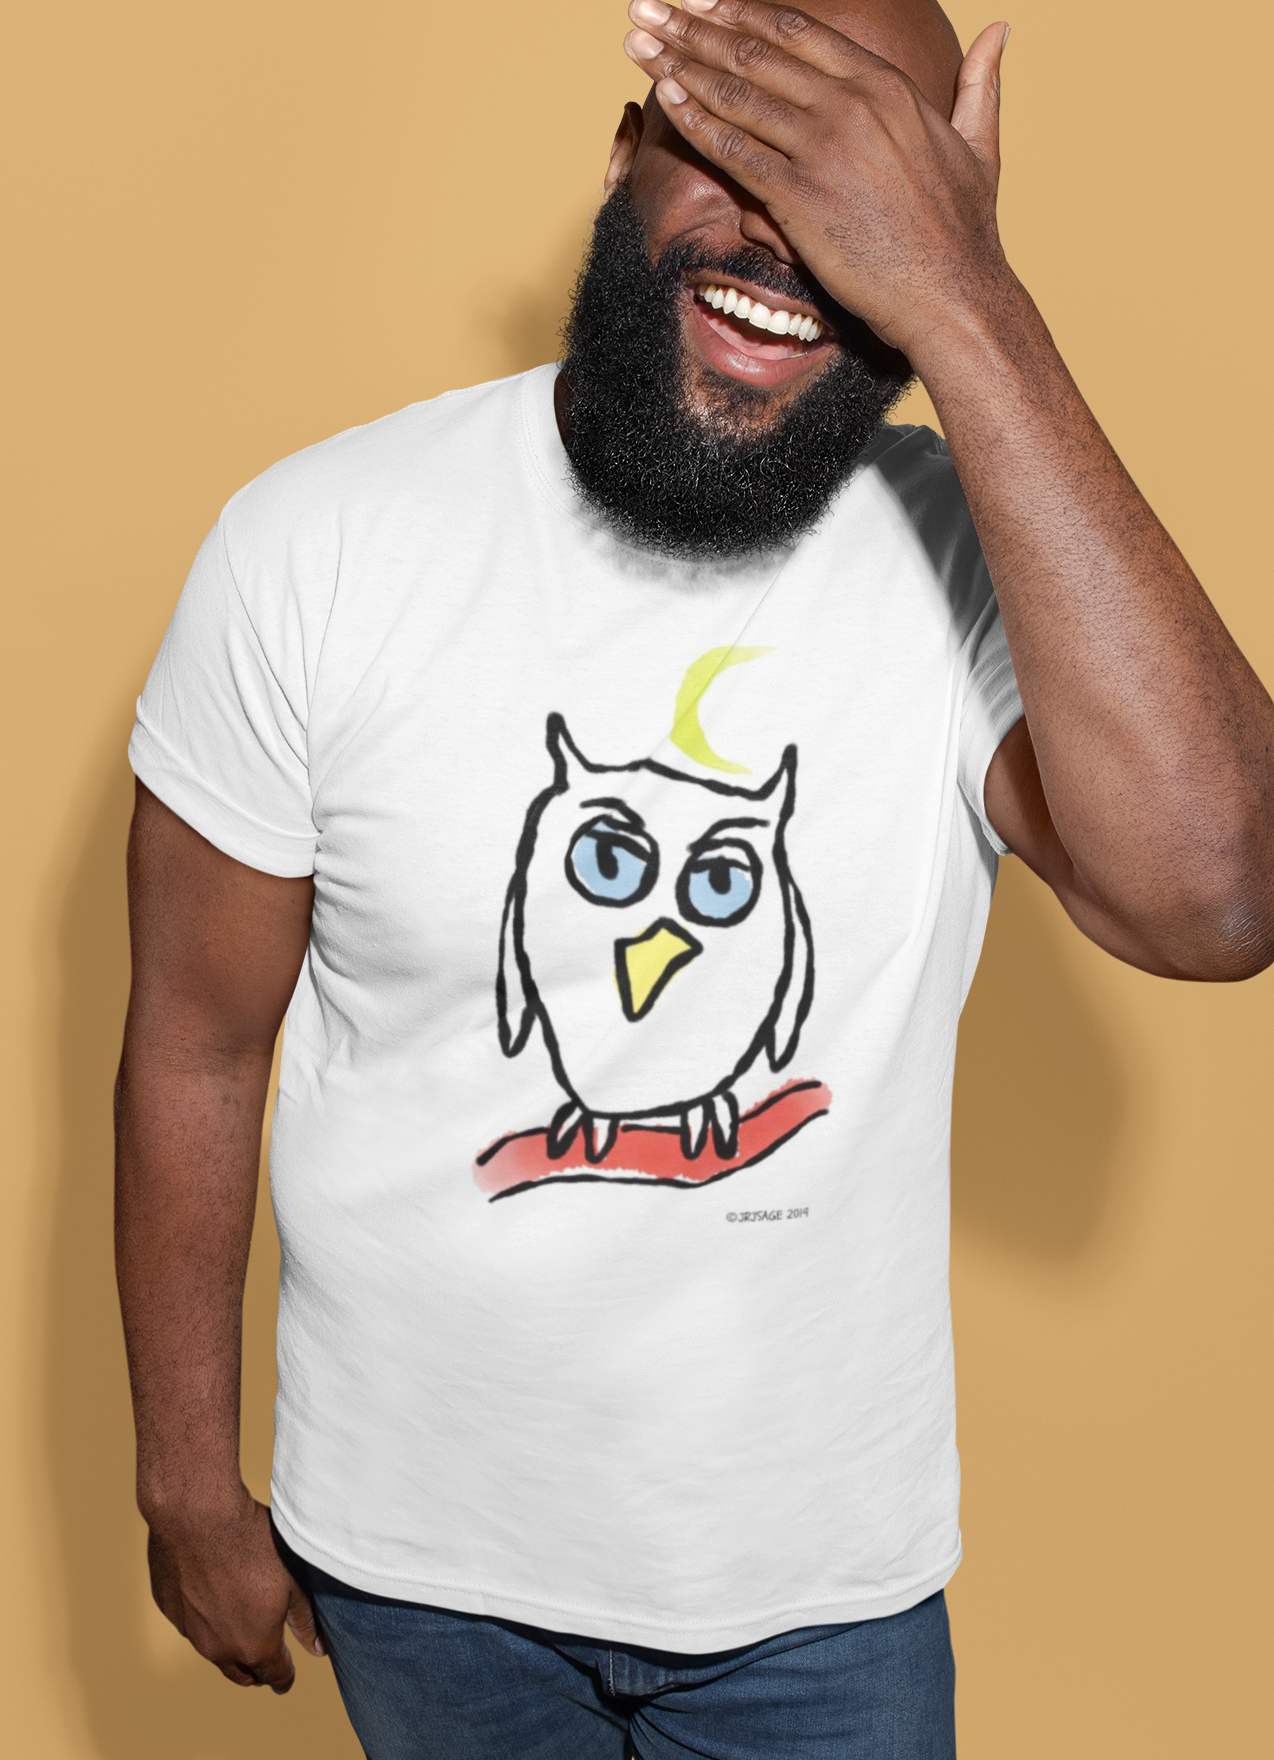 Owl T-shirts - Young man wearing a classic white vegan cotton Night Owl T-shirt design by Hector and Bone